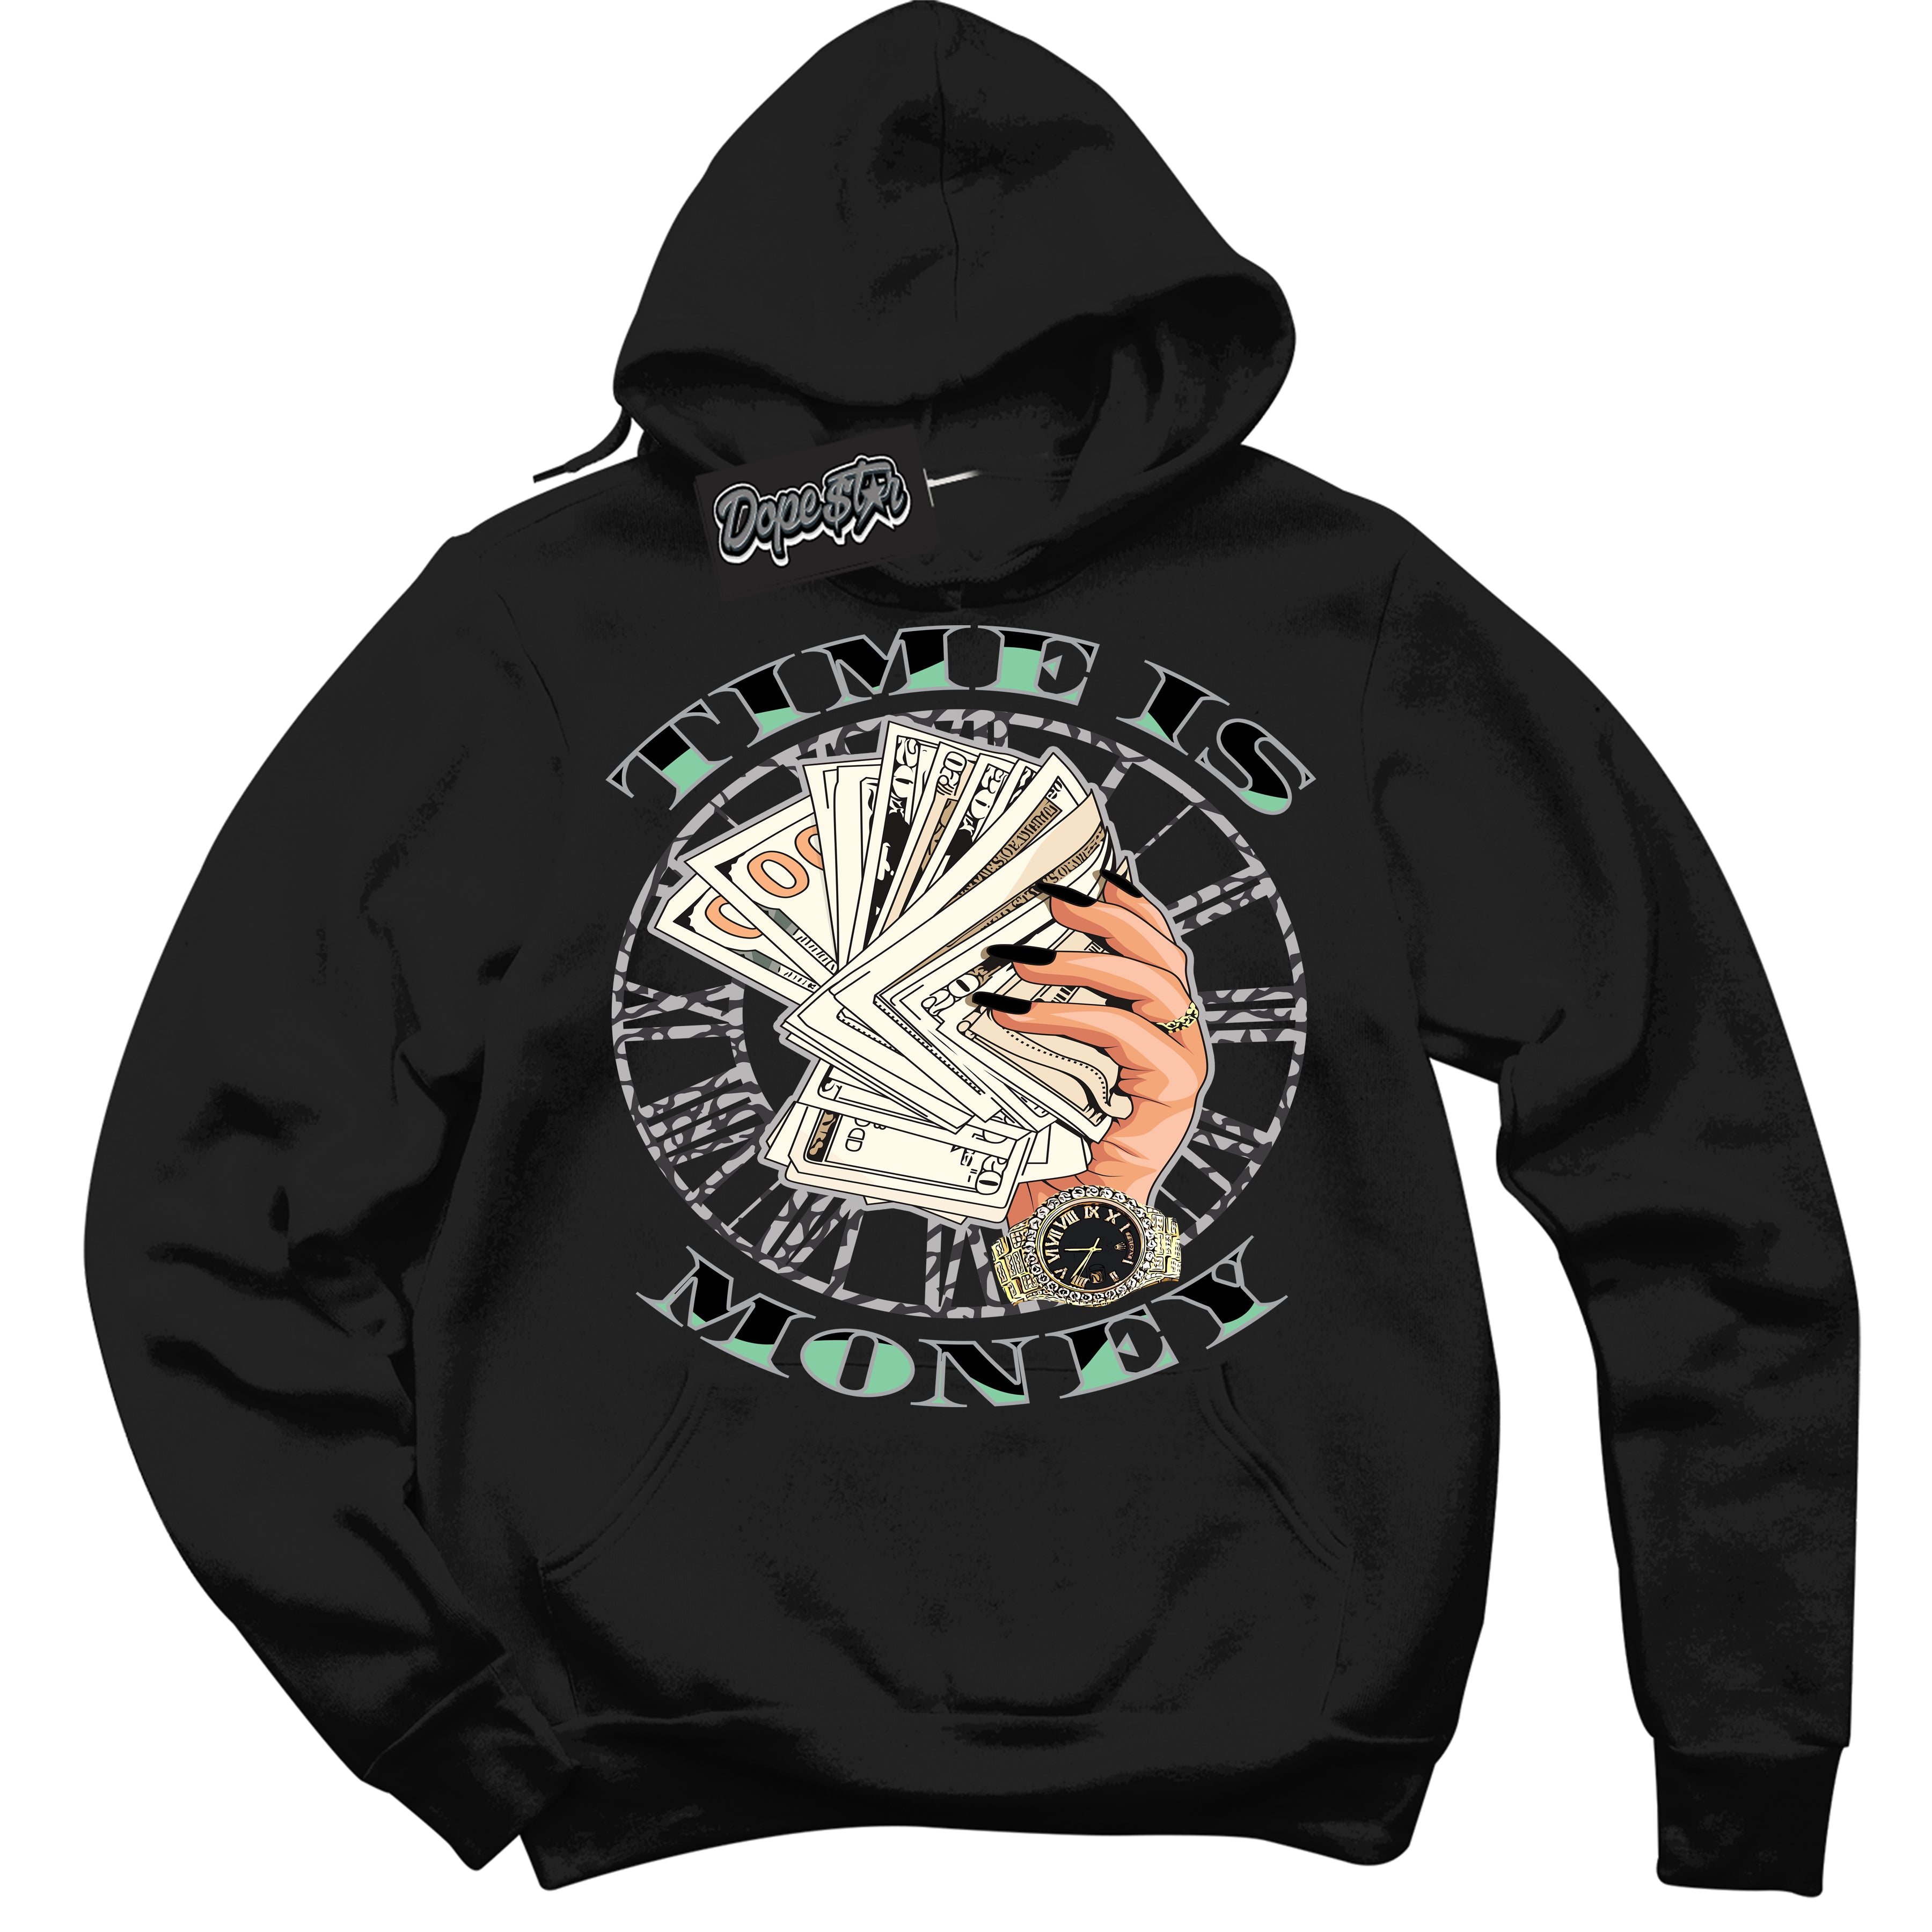 Cool Black Graphic DopeStar Hoodie with “ Time Is Money “ print, that perfectly matches Green Glow 3S sneakers